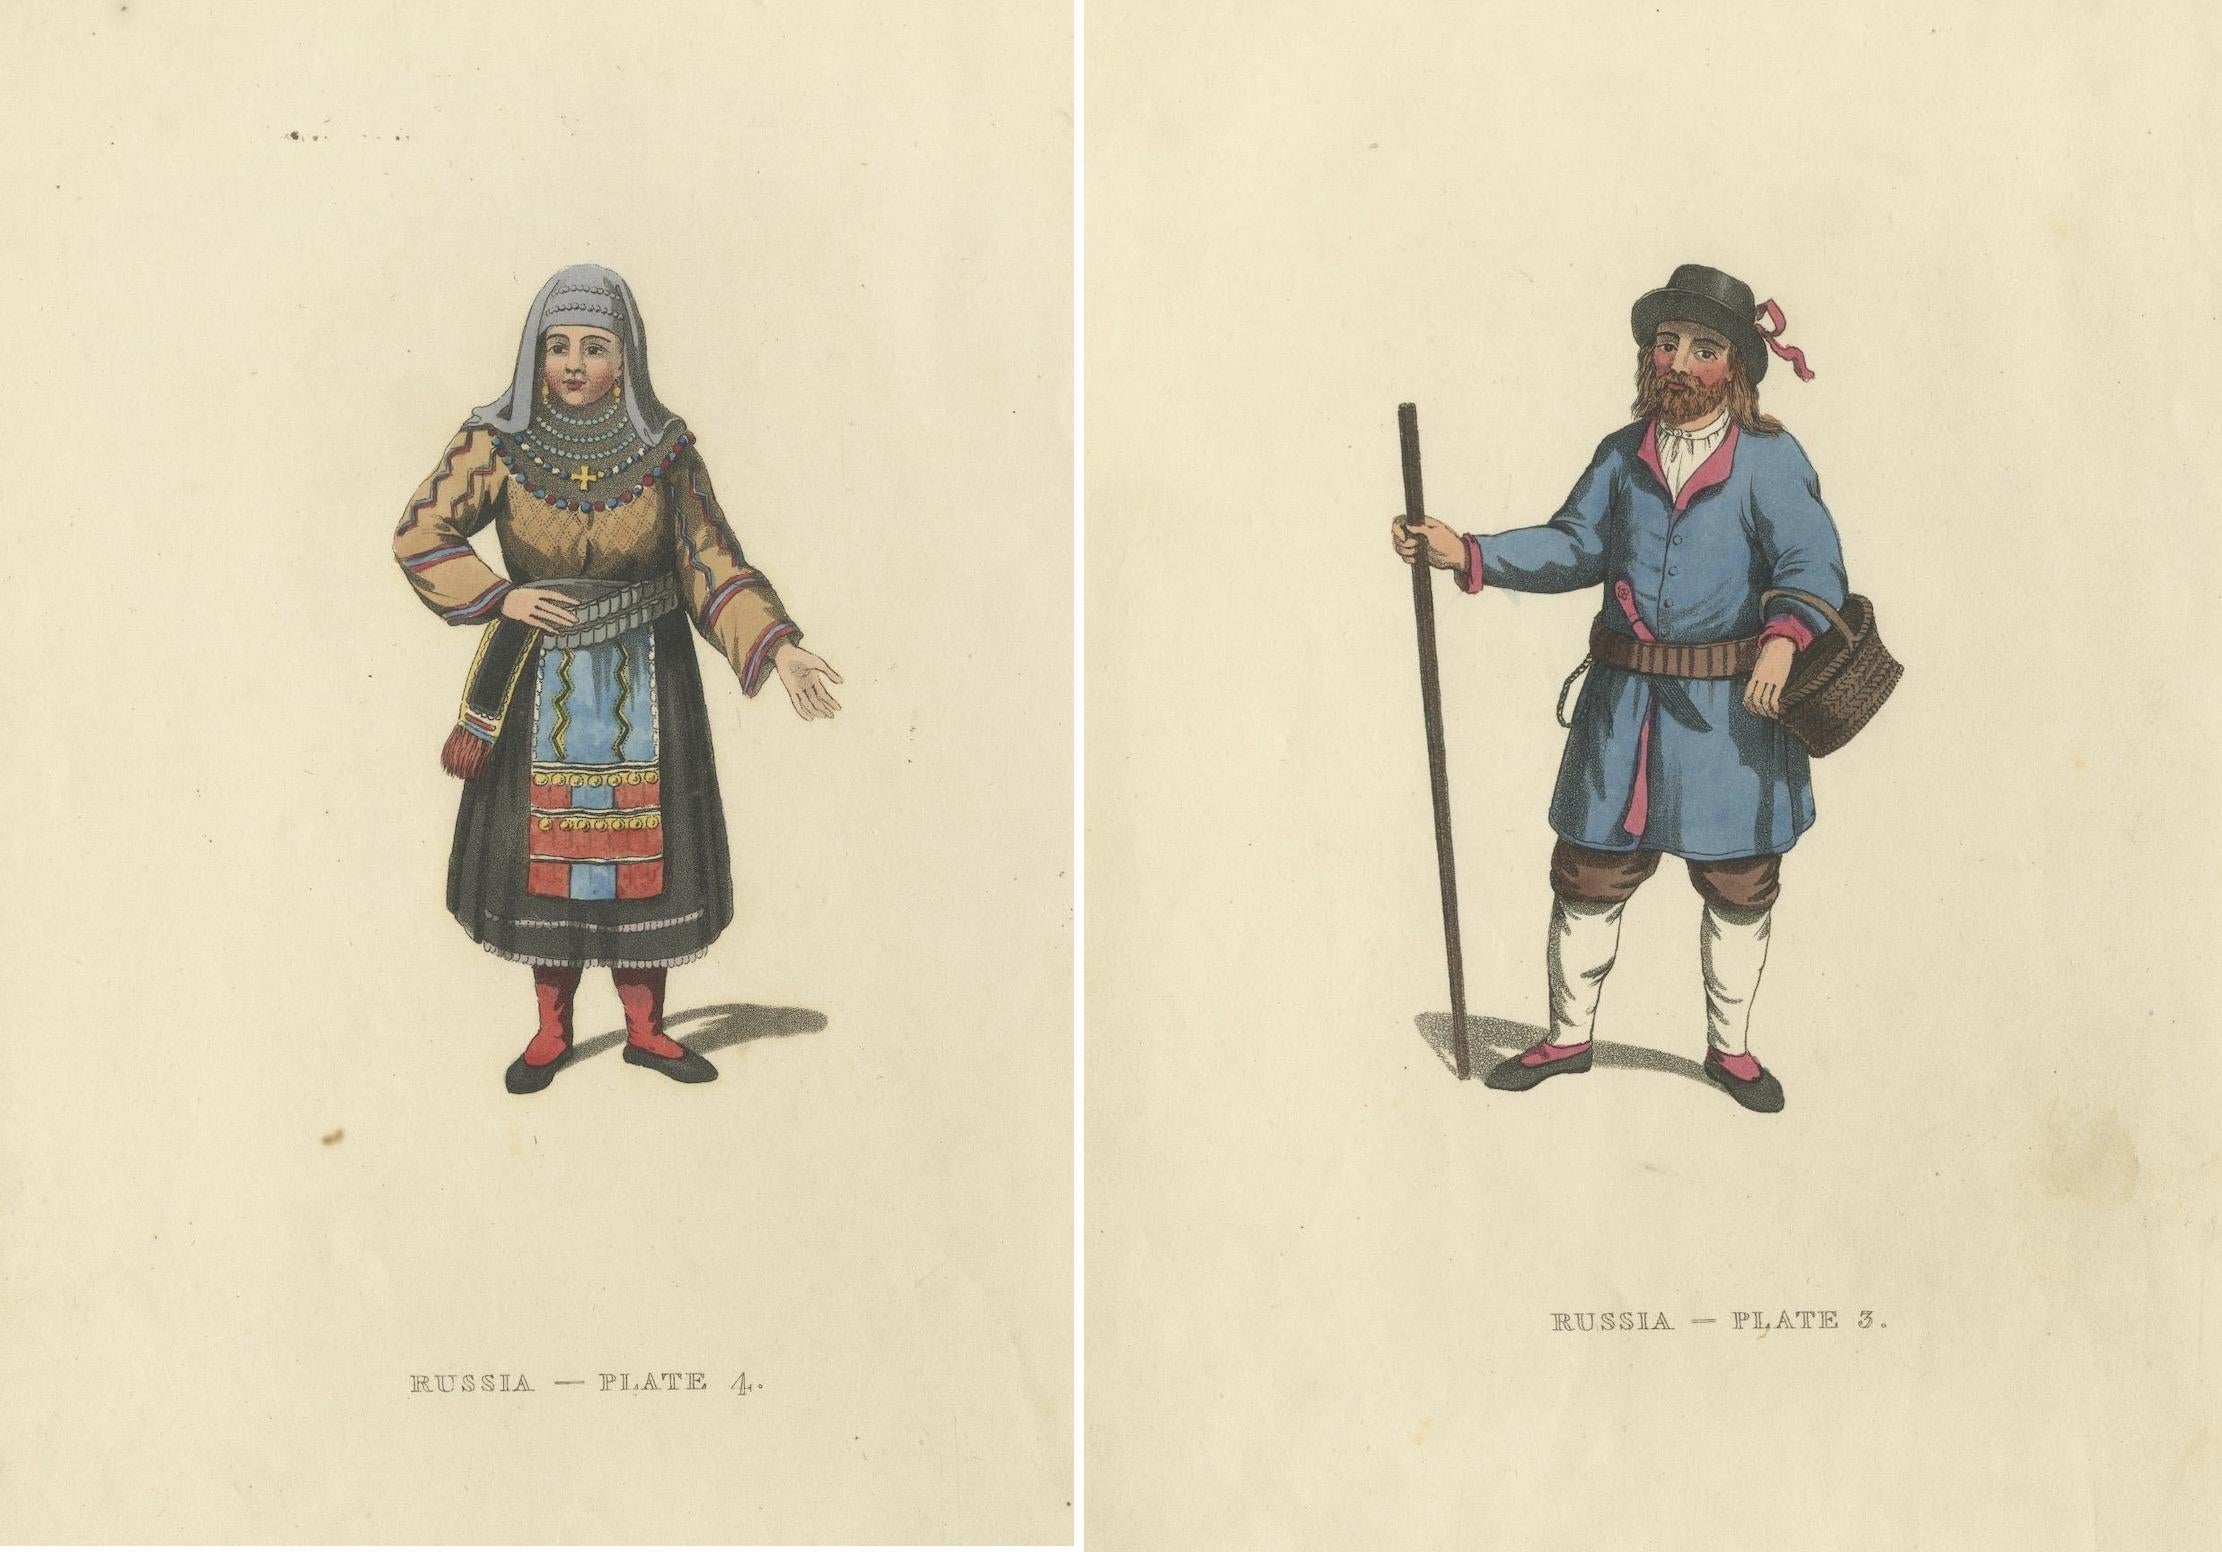 Early 19th Century Finnish Folklore: The Rural Dress and Customs of 19th Century Finland, 1814 For Sale